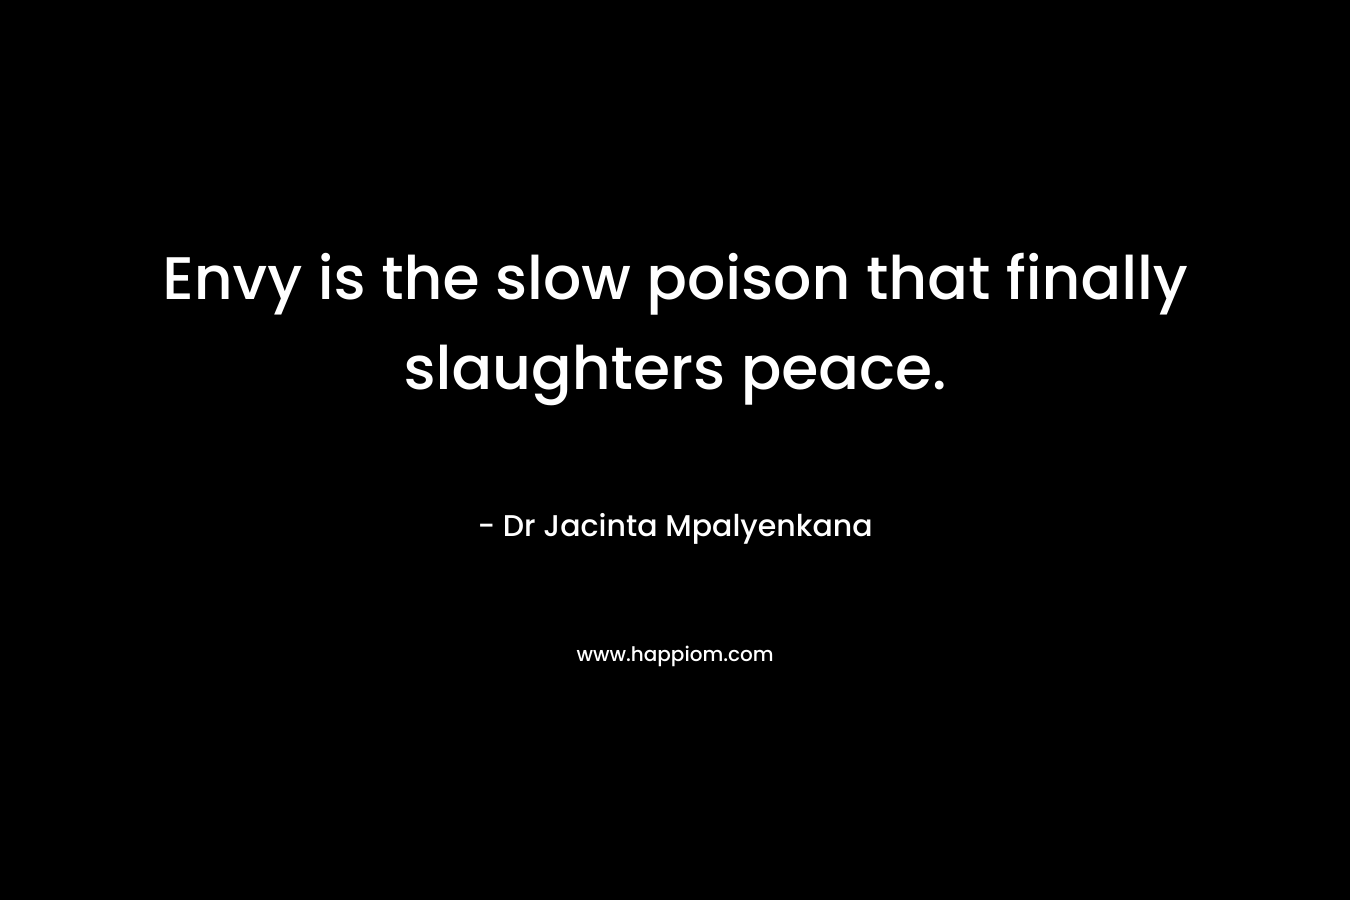 Envy is the slow poison that finally slaughters peace.